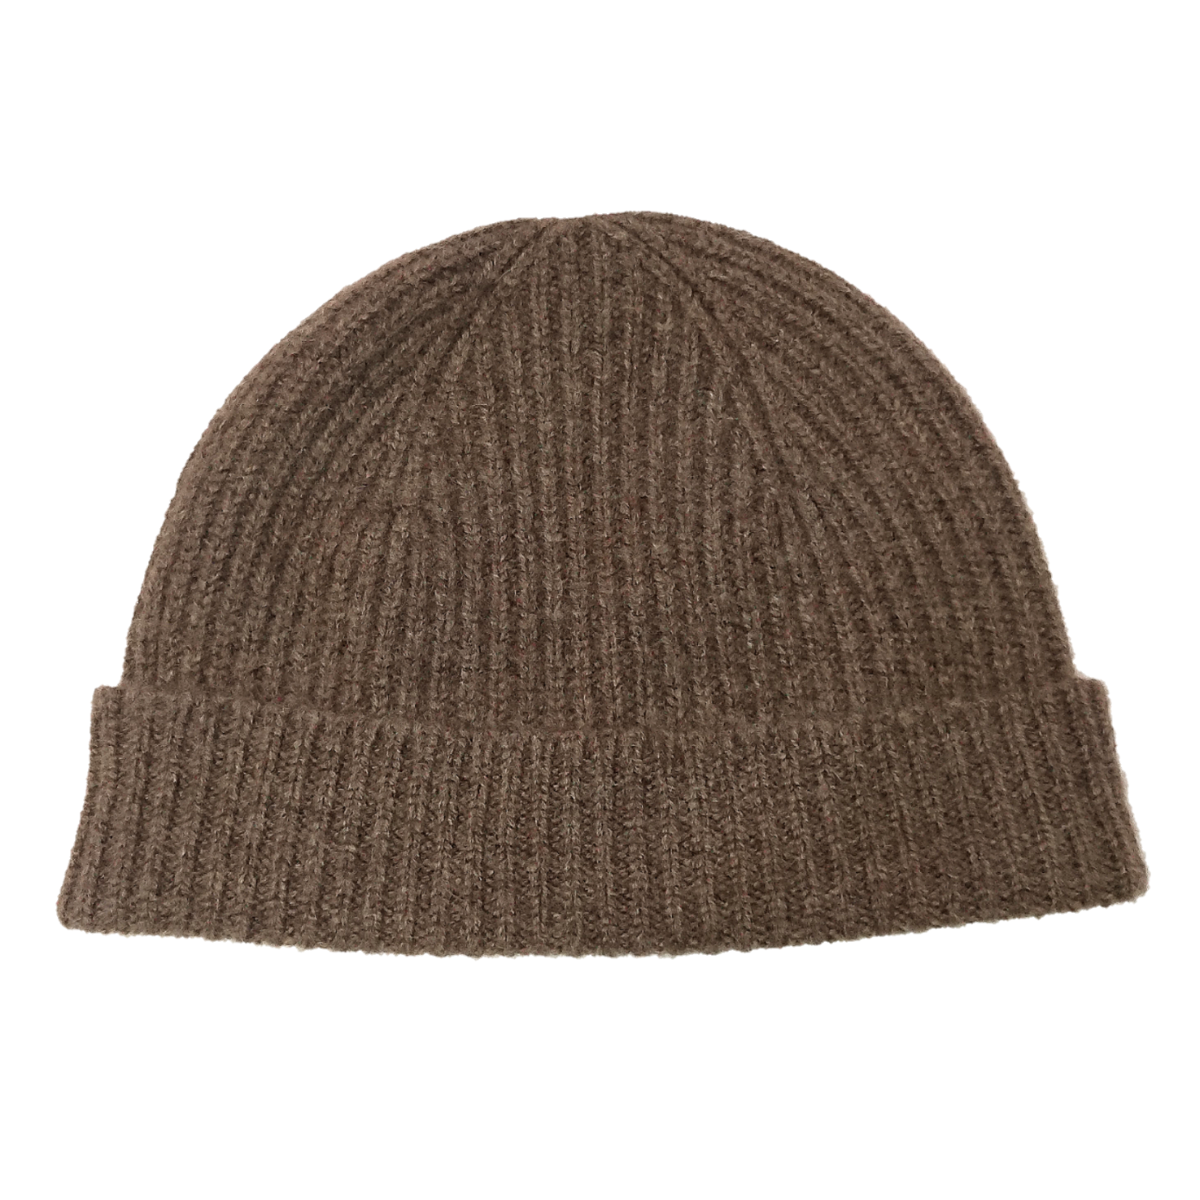 100% Pure Scottish Cashmere Ribbed Beanies